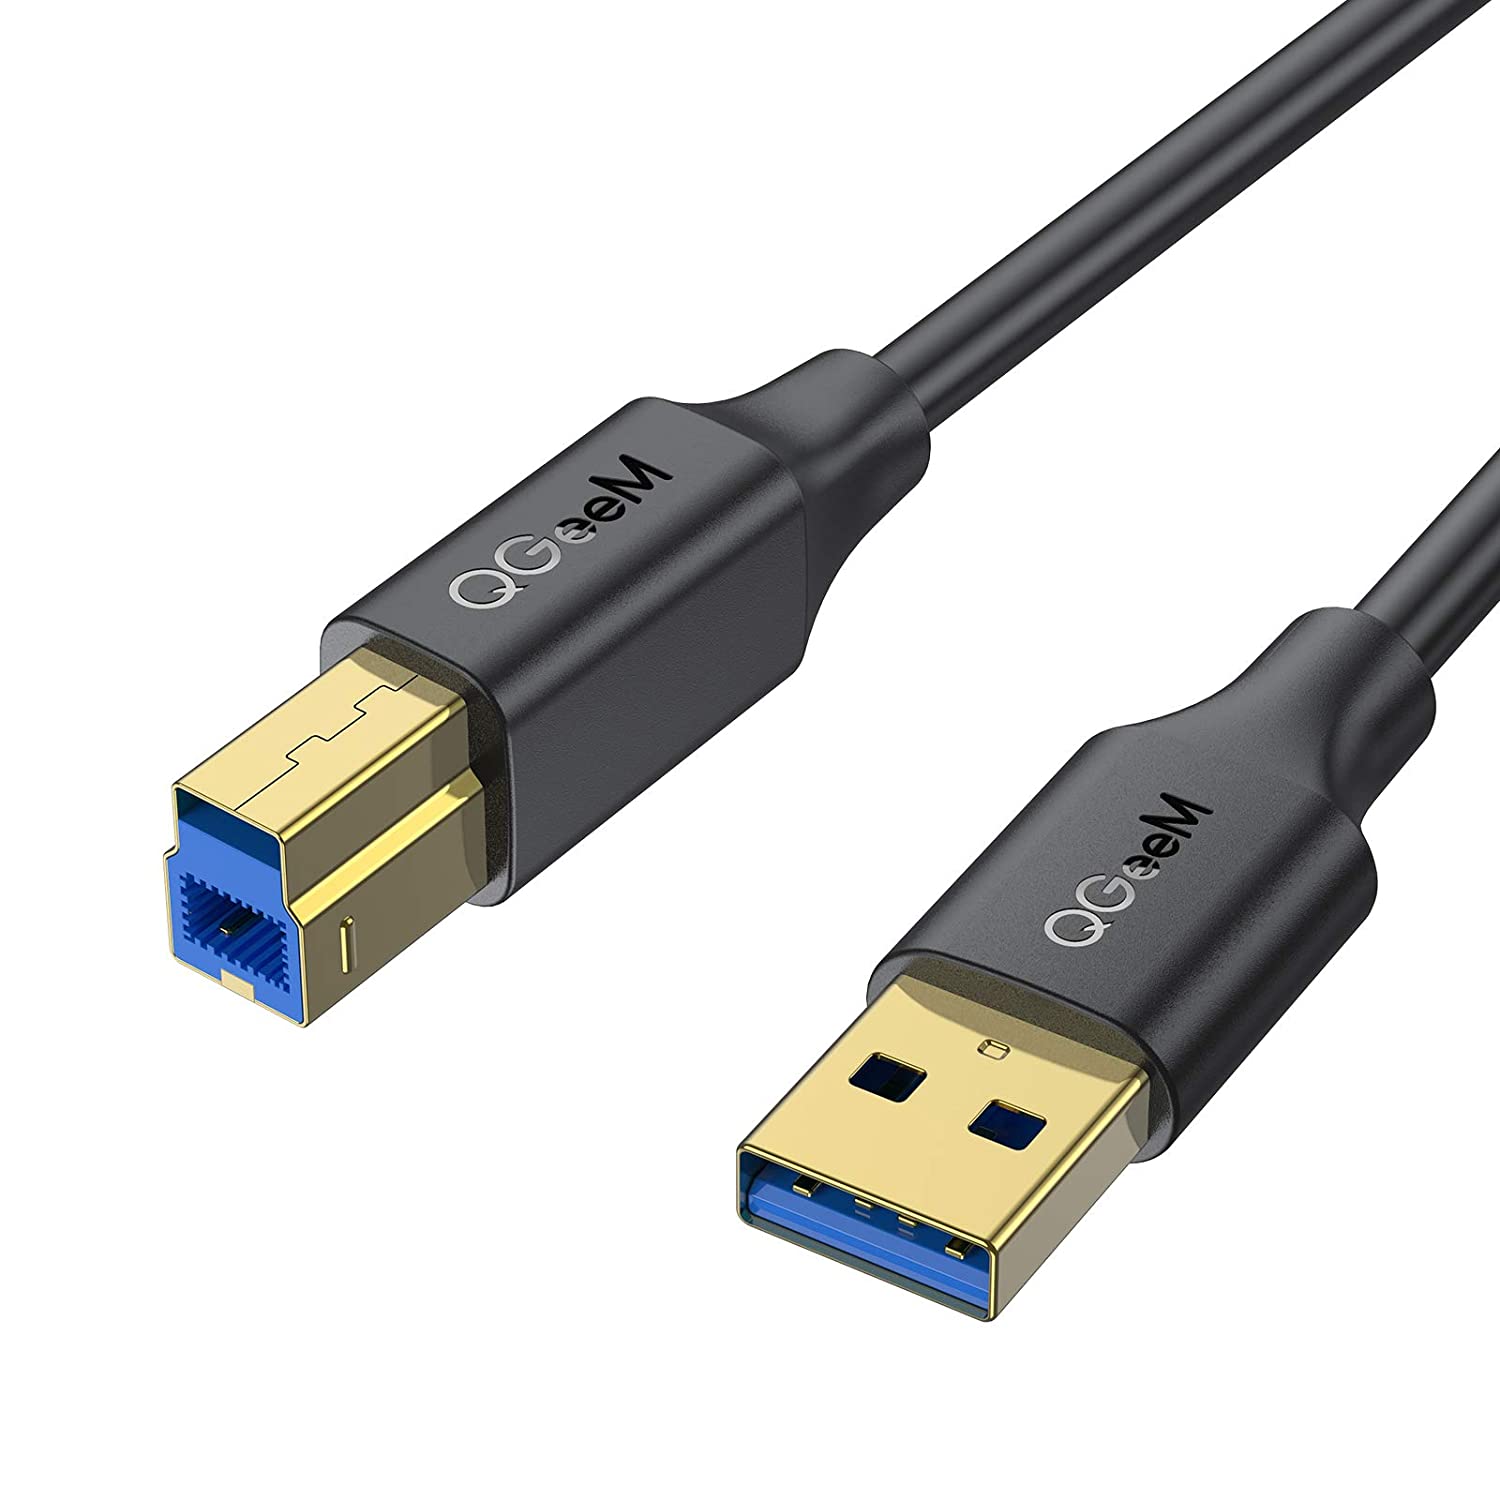 USB 3.0 Cable 6FT, QGeeM Superspeed USB 3.0 Cable A Male to B Male Compatible with Docking Station, Monitor, External Hard Drivers, Scanner and More, USB 3.0 Upstream Cable - image 1 of 7